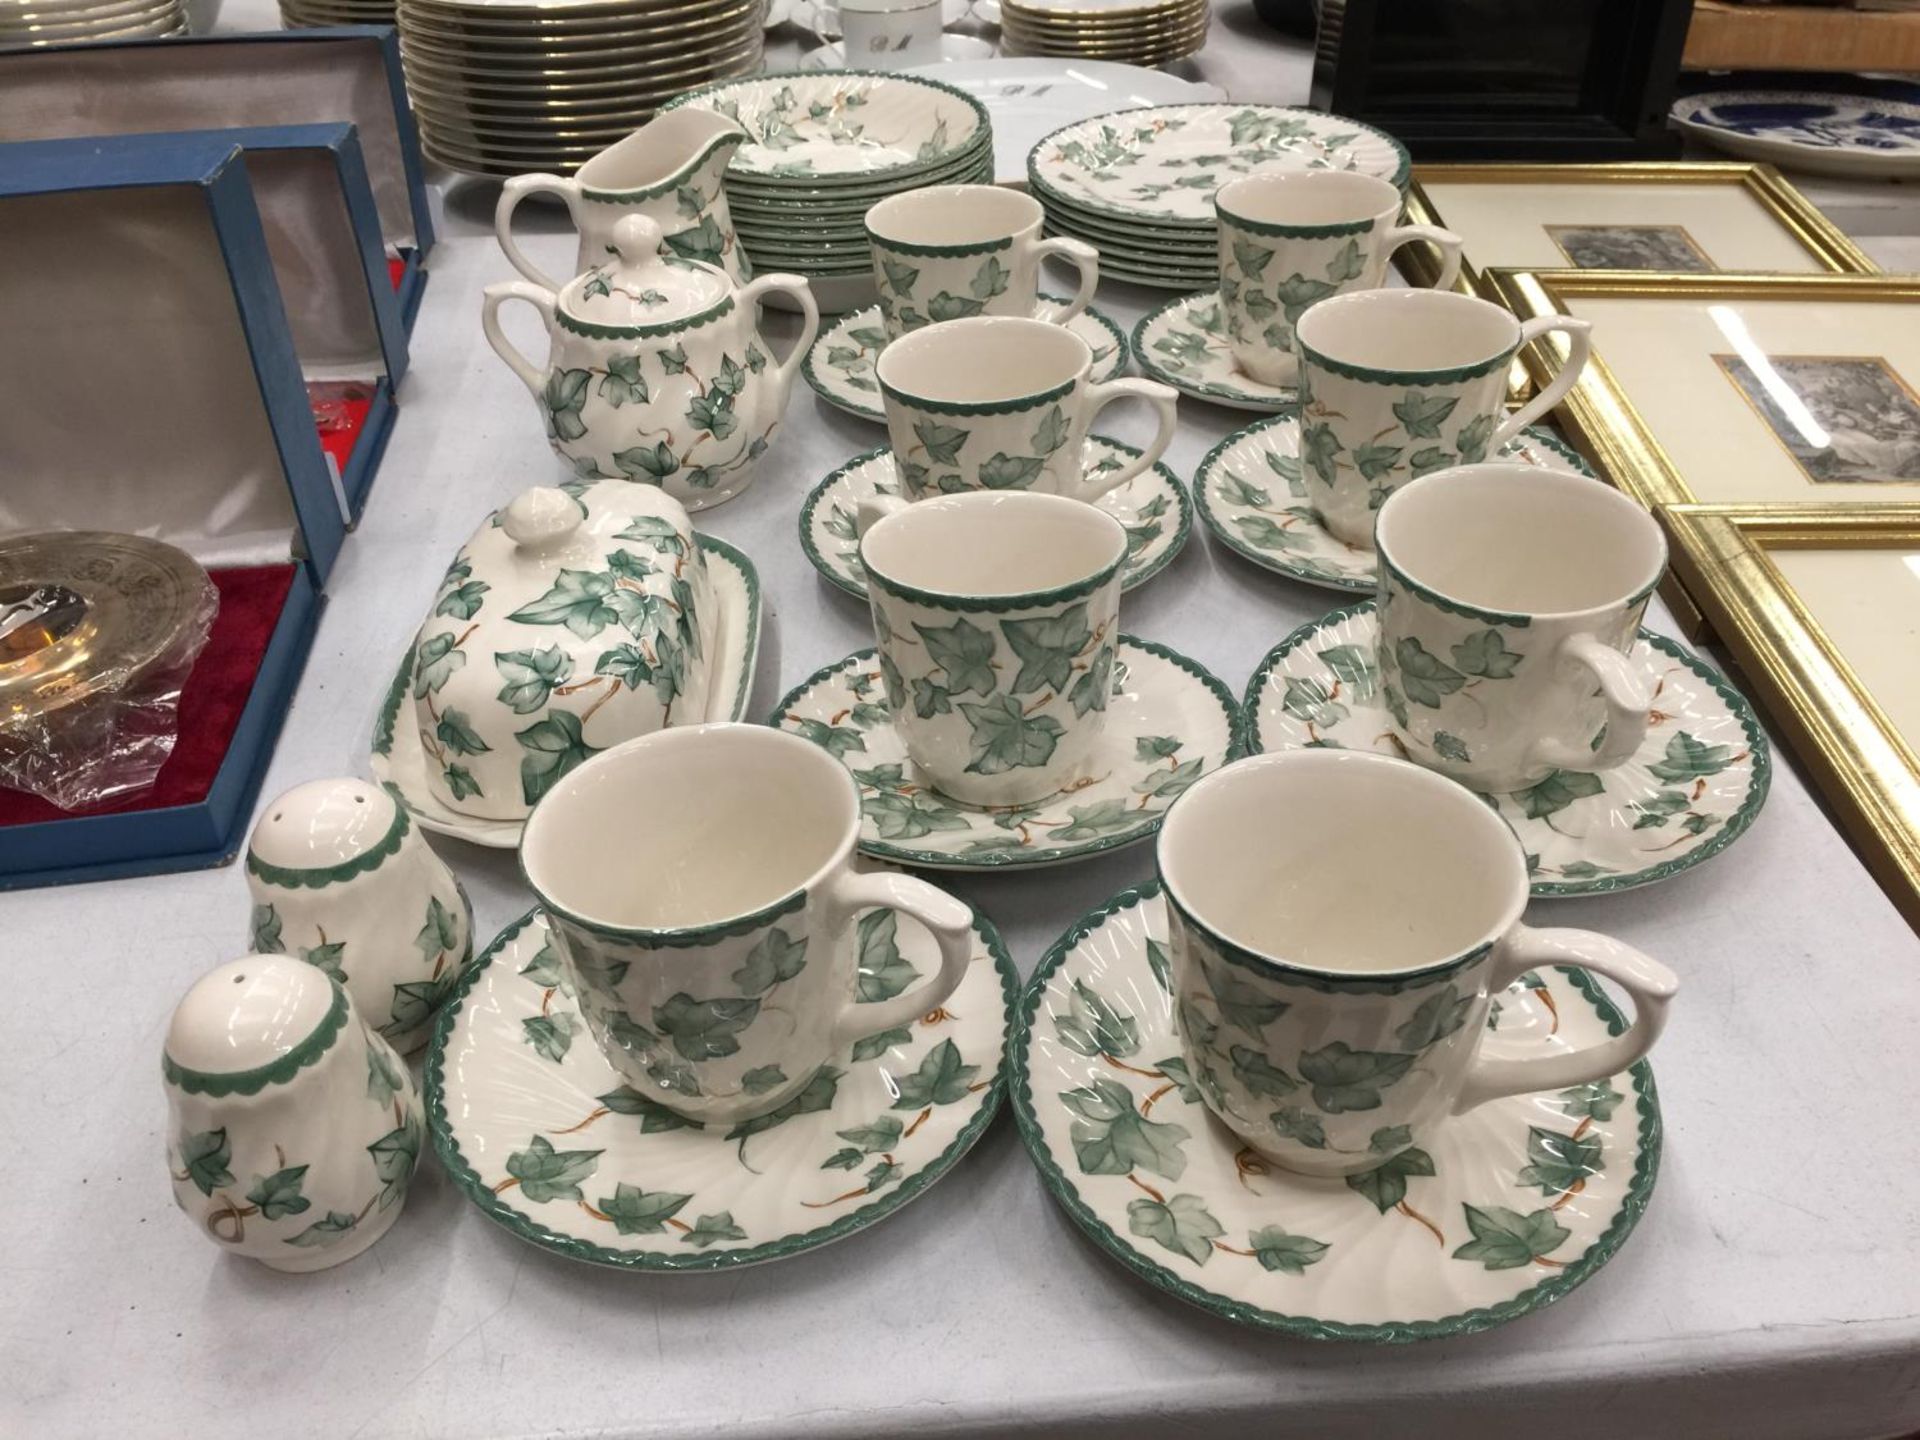 A QUANTITY OF CERAMIC TEAWARE TO INCLUDE CUPS, SAUCERS, PLATES, BOWLS, SUGAR BOWL, CREAM JUG, BUTTER